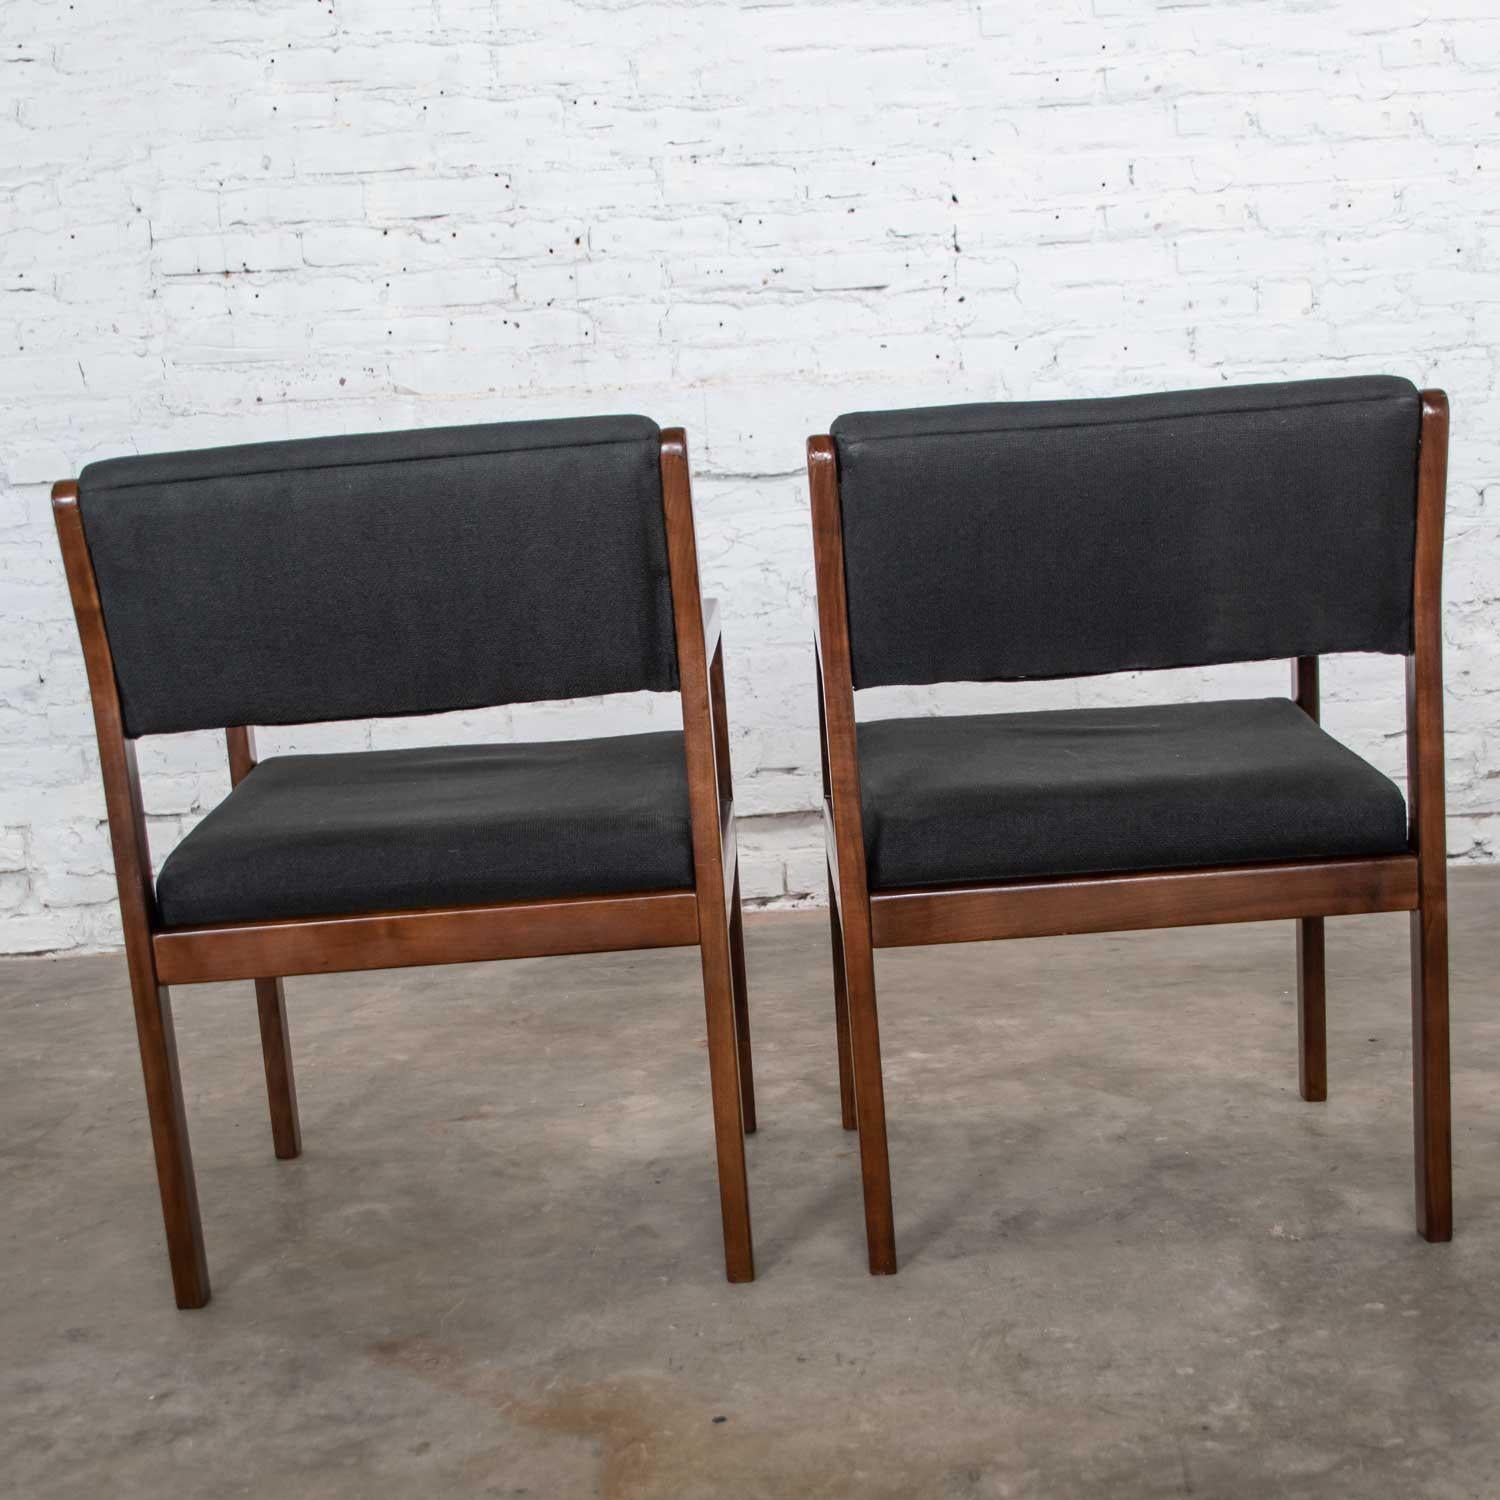 Modern Pair of Black and Walnut Tone Wood Accent or Dining Armchairs by Haworth For Sale 1